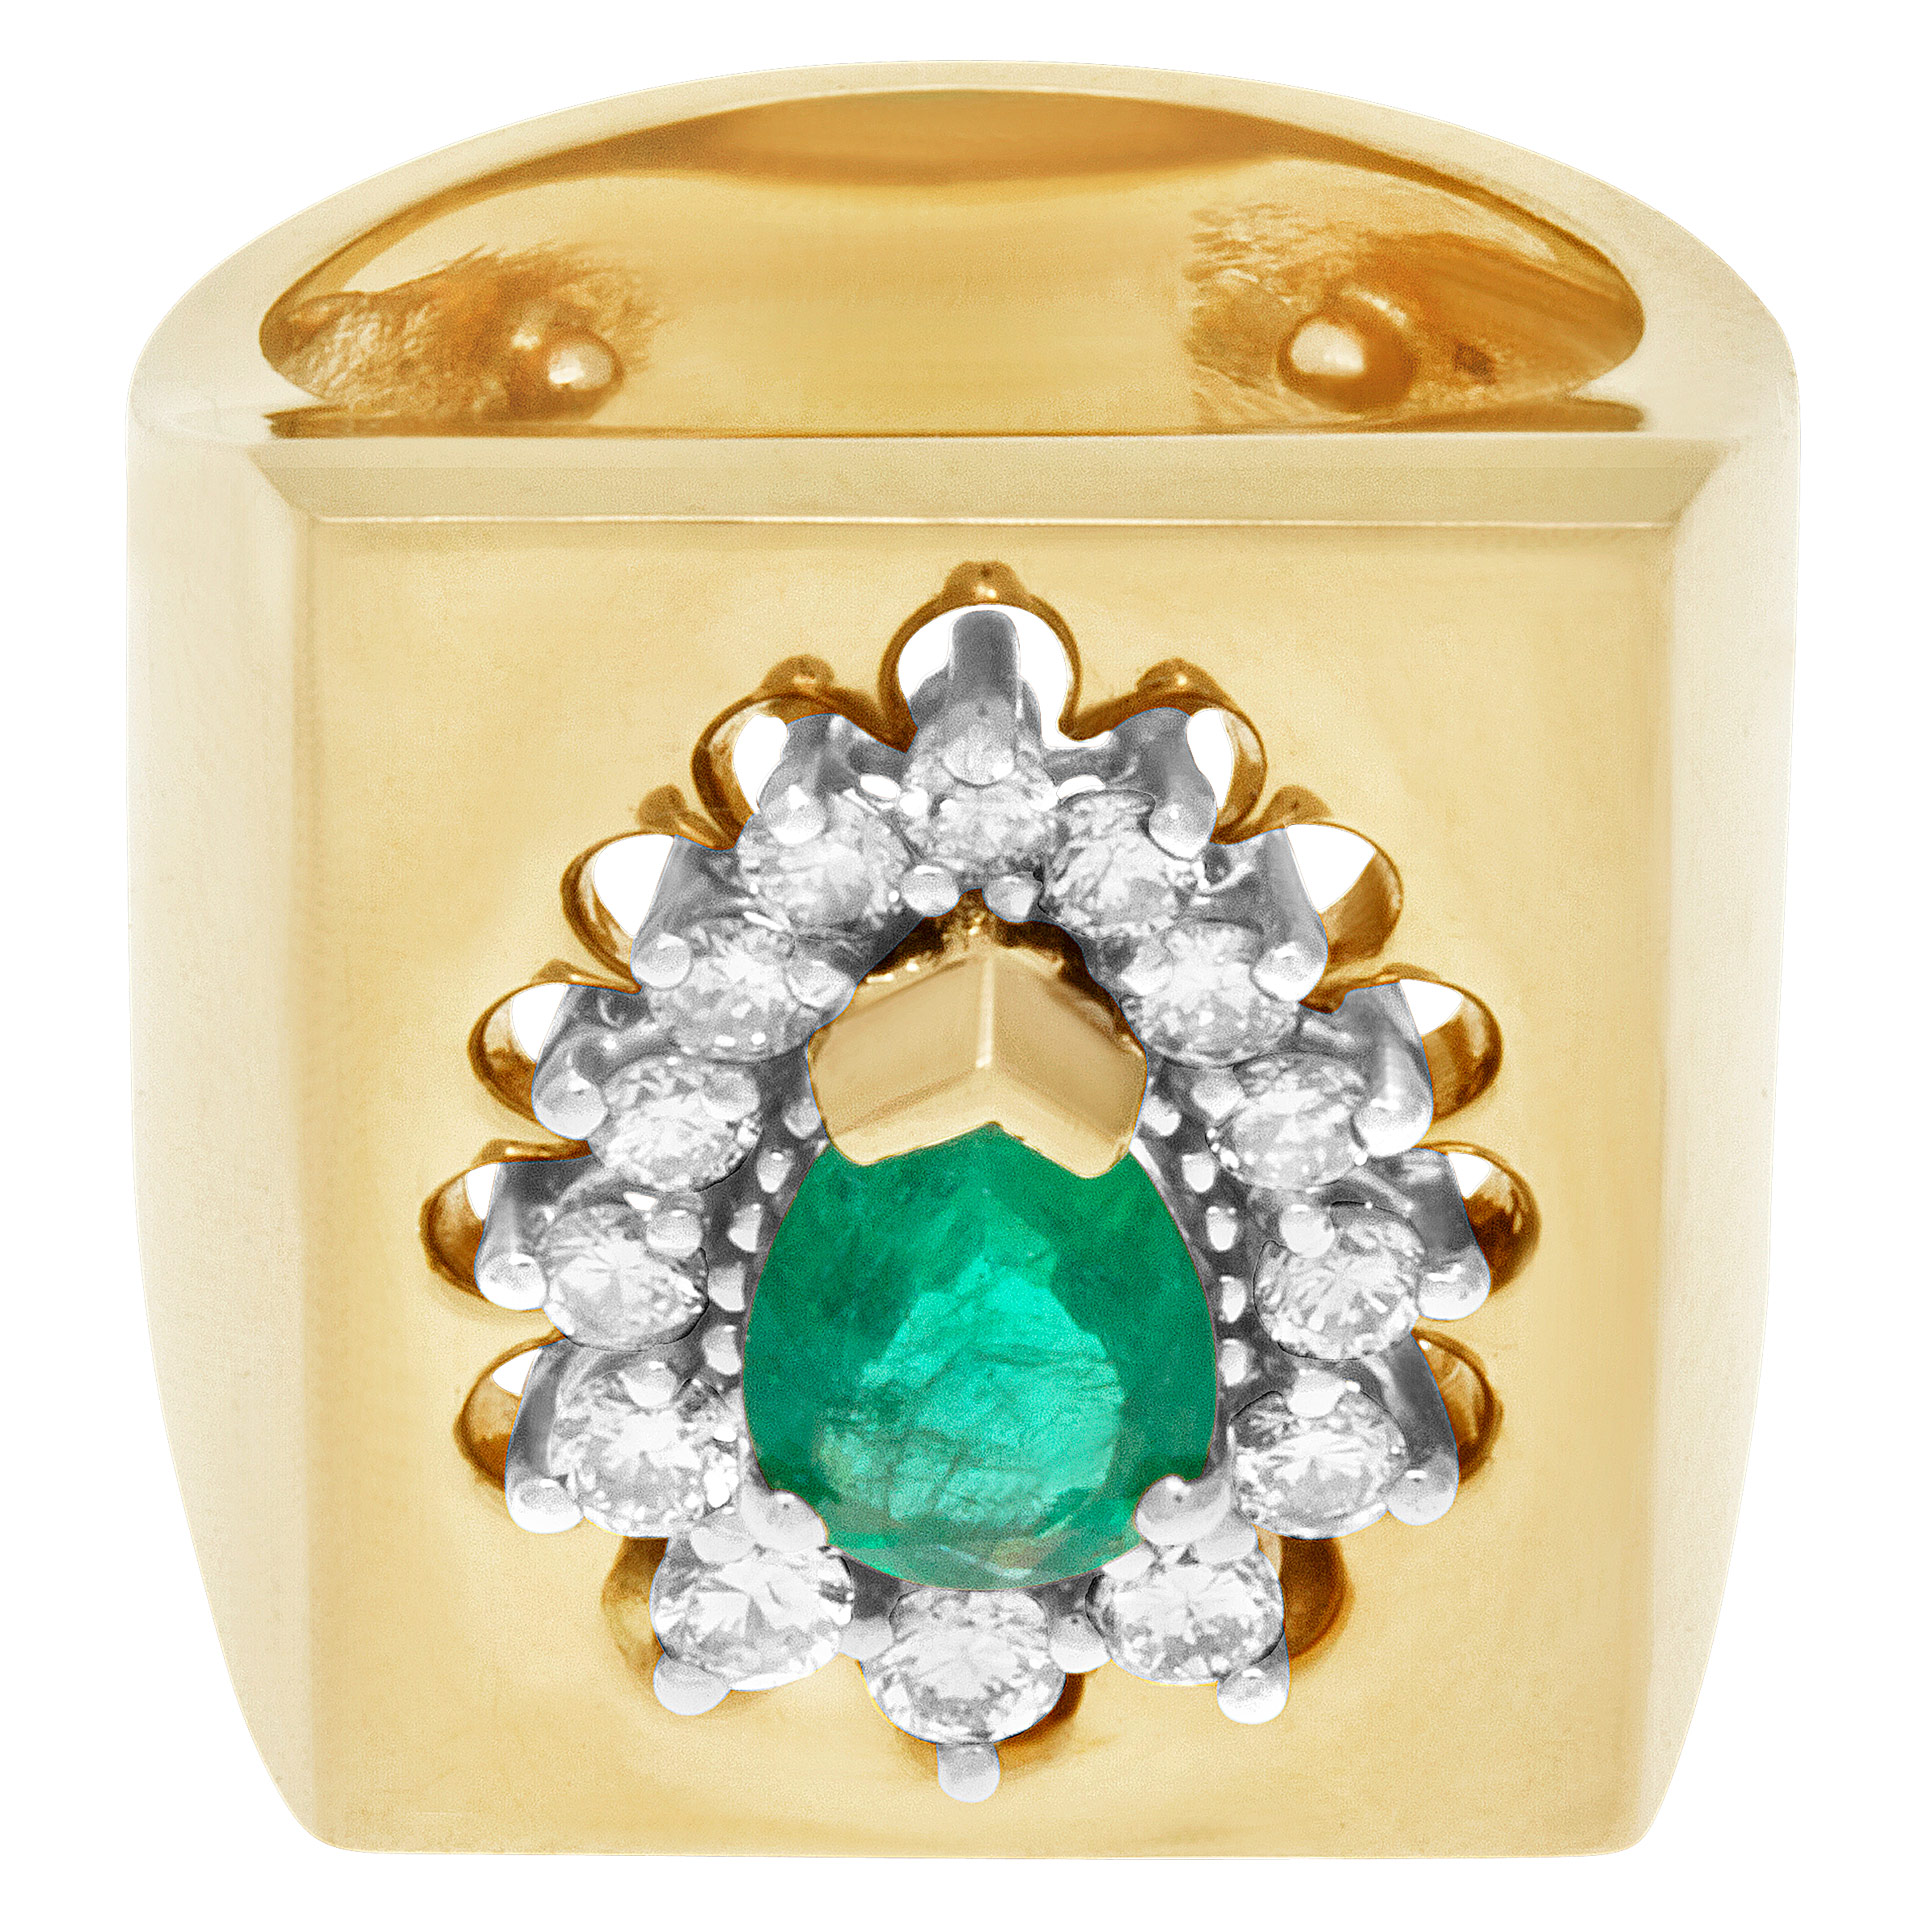 Emerald & diamond ring in 14k yellow gold with approximately 2 carats in diamonds